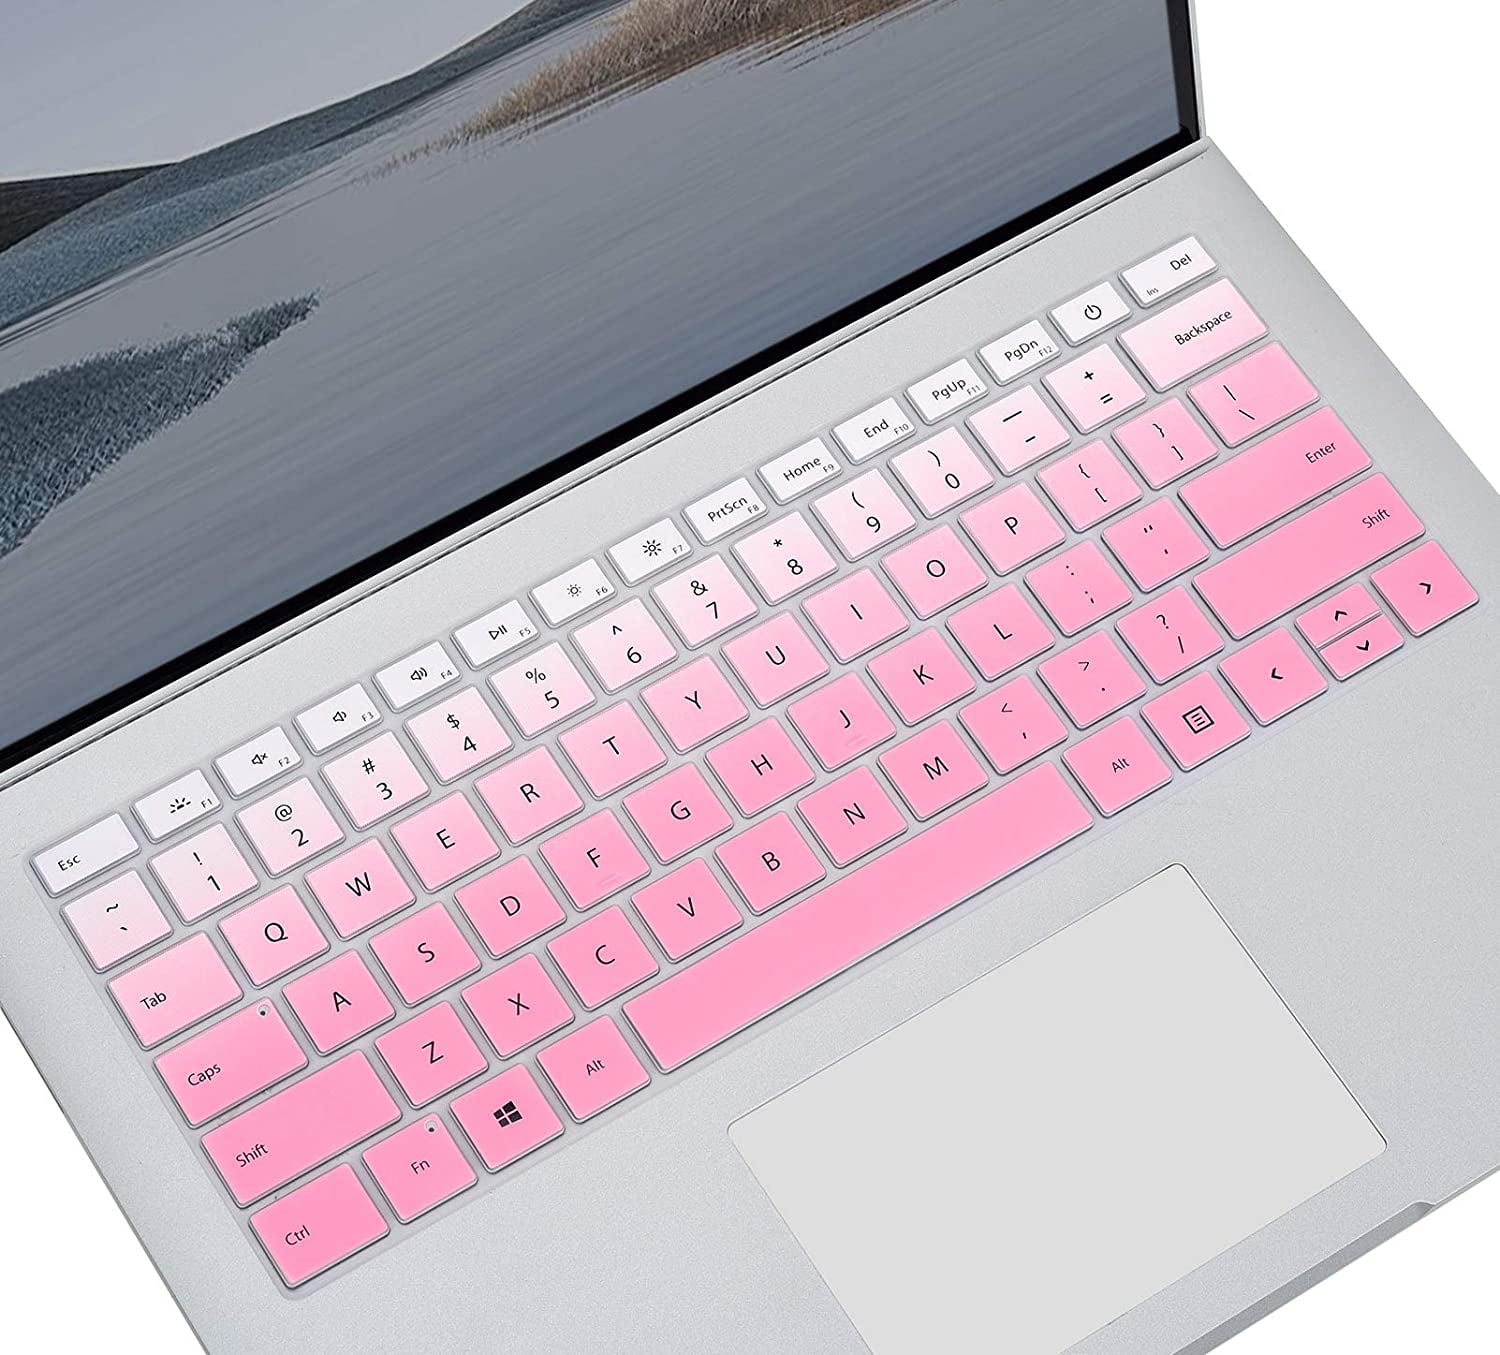 -CandyBlack NOT Fit for Surface Pro Model MUBUY-GOL Keyboard Cover Design for 2019 Surface Laptop 3 |2019 2018 Surface Laptop 2 |2019 2018 2017 Surface Book 2/1 13.5 and 15 |Surface Laptop 2017 